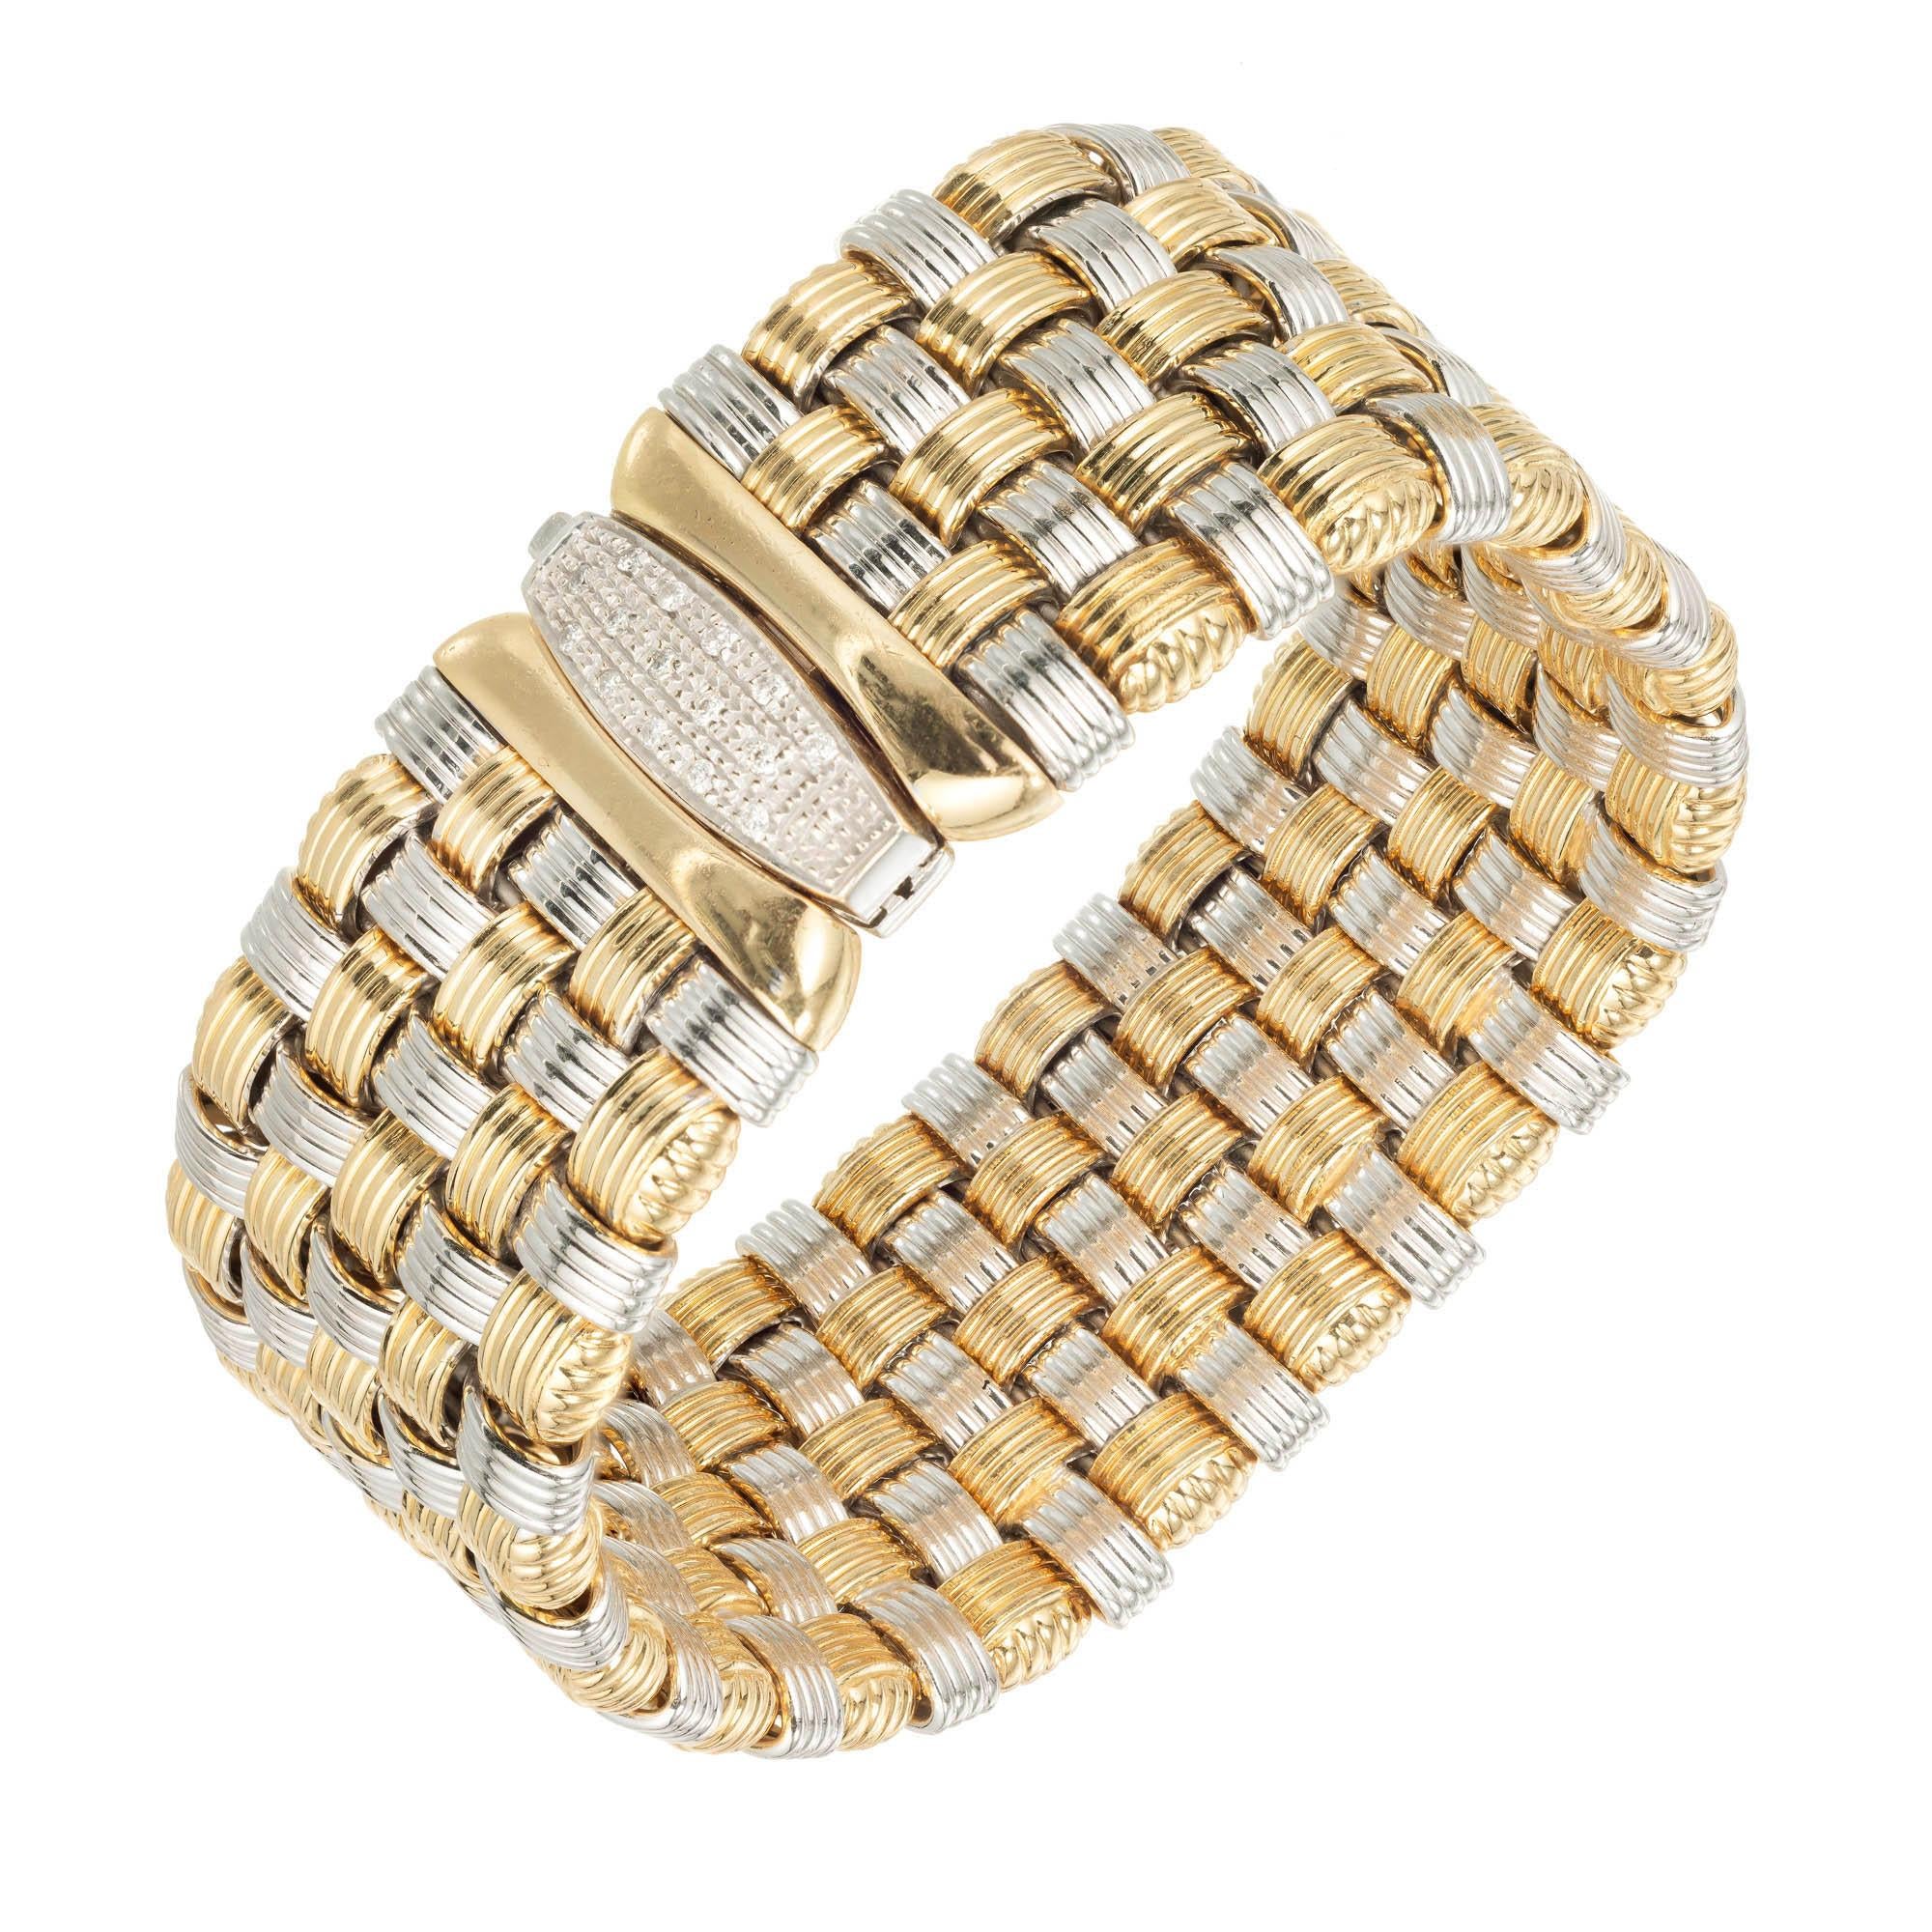 OTC Italian 18k yellow and white gold mesh bracelet with diamond catch. Circa 1960-1970.

15 round diamonds, .01ct each, approx. total weight .15cts, H, SI1
Length: 7.5 inches
18k yellow and white gold
Tested and stamped: 18k
Hallmark: OTC